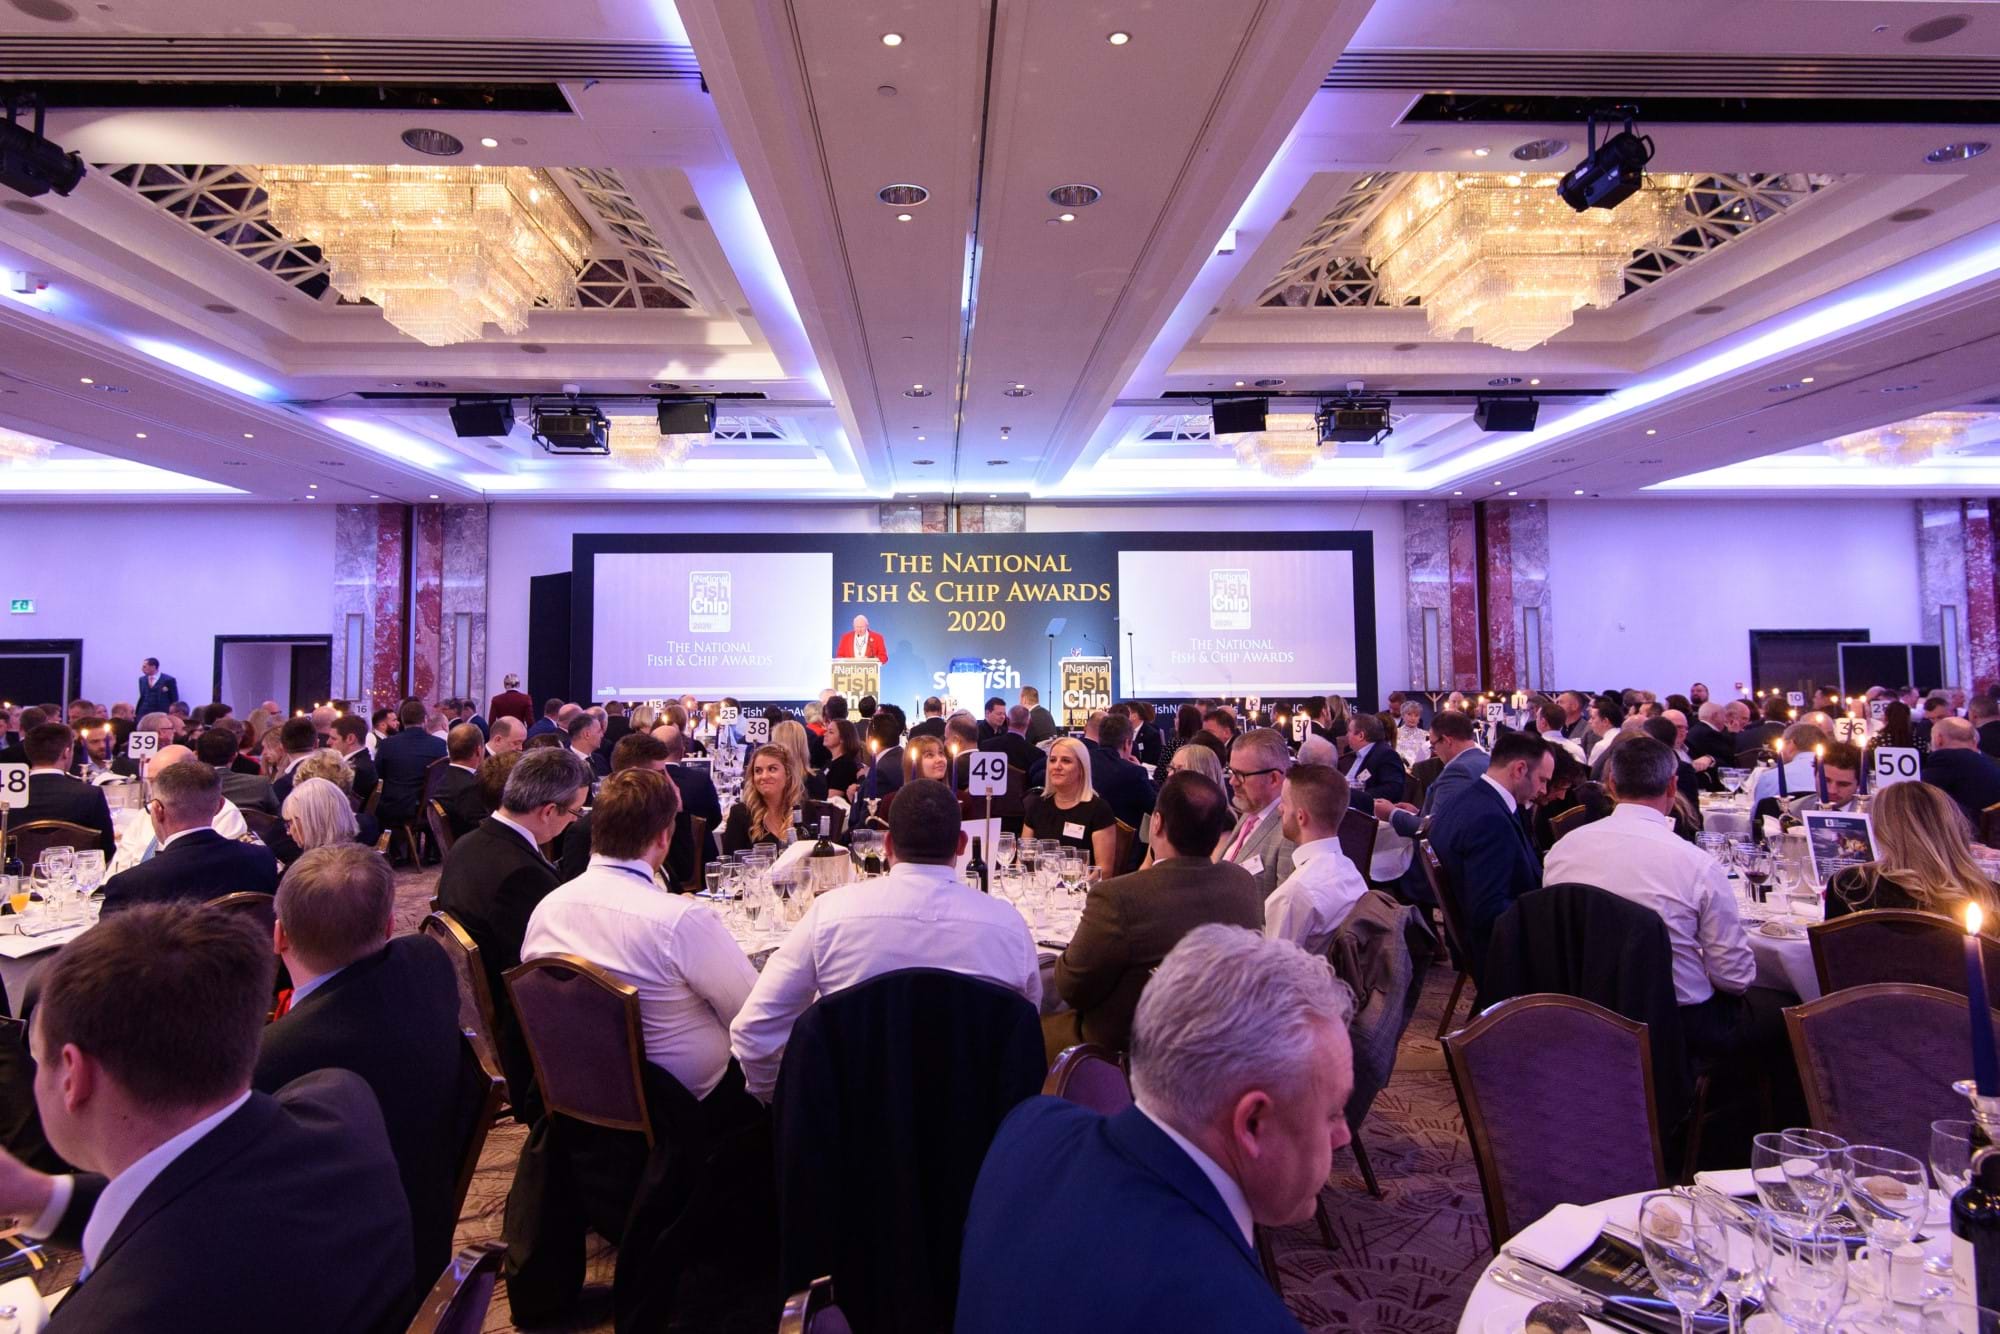 Photo showing lots of people sat around tables in front of the stage at the National Fish & Chip Awards ceremony in January 2020.